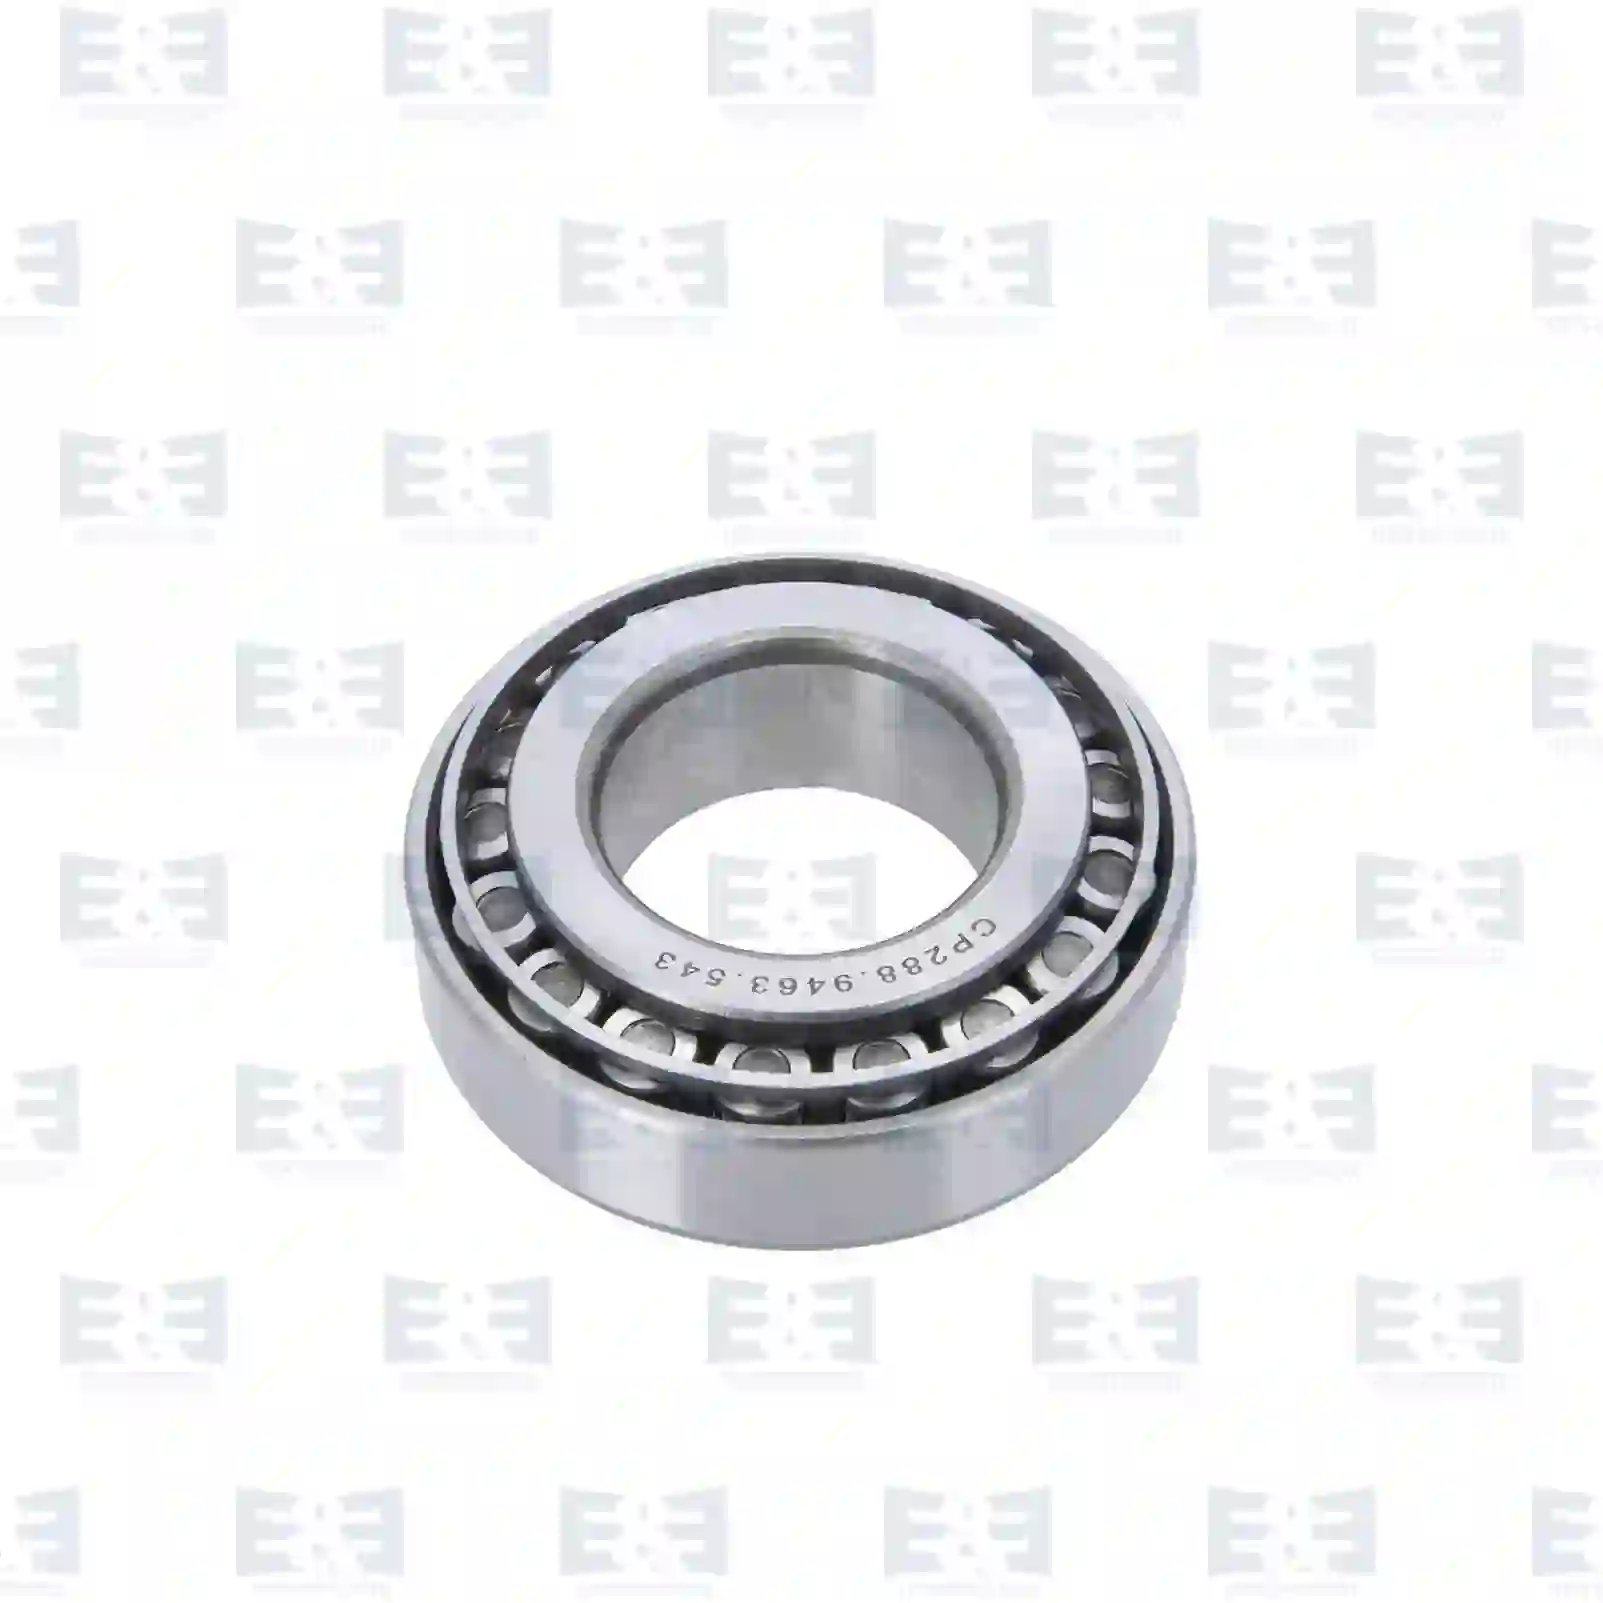 Bearings Tapered roller bearing, EE No 2E2285041 ,  oem no:0014554, 14554, 0001440642X1, 004207725000, 005090157, 1440642X1, 4207725, TK4207725000, 01110002, 26800140, 10500474, 710500474, 8-94248078-0, 01110002, 07164502, 08560451, 08850841, 26800140, 3612944000, 503644293, 60144280, 93804619, 93806251, 823632208, 06324890080, 06324990062, 06324990063, 81934200055, 81934200246, 0039813805, 0039819405, 0159813405, 0159813805, 0159815605, 0169813505, 0169817205, MB025005, 40210-76000, 40210-9X60A, 0023432208, 0773220800, 0959232208, 5516014042, 5516014518, 5516014554, 214104, 183763, 7011093 E&E Truck Spare Parts | Truck Spare Parts, Auotomotive Spare Parts